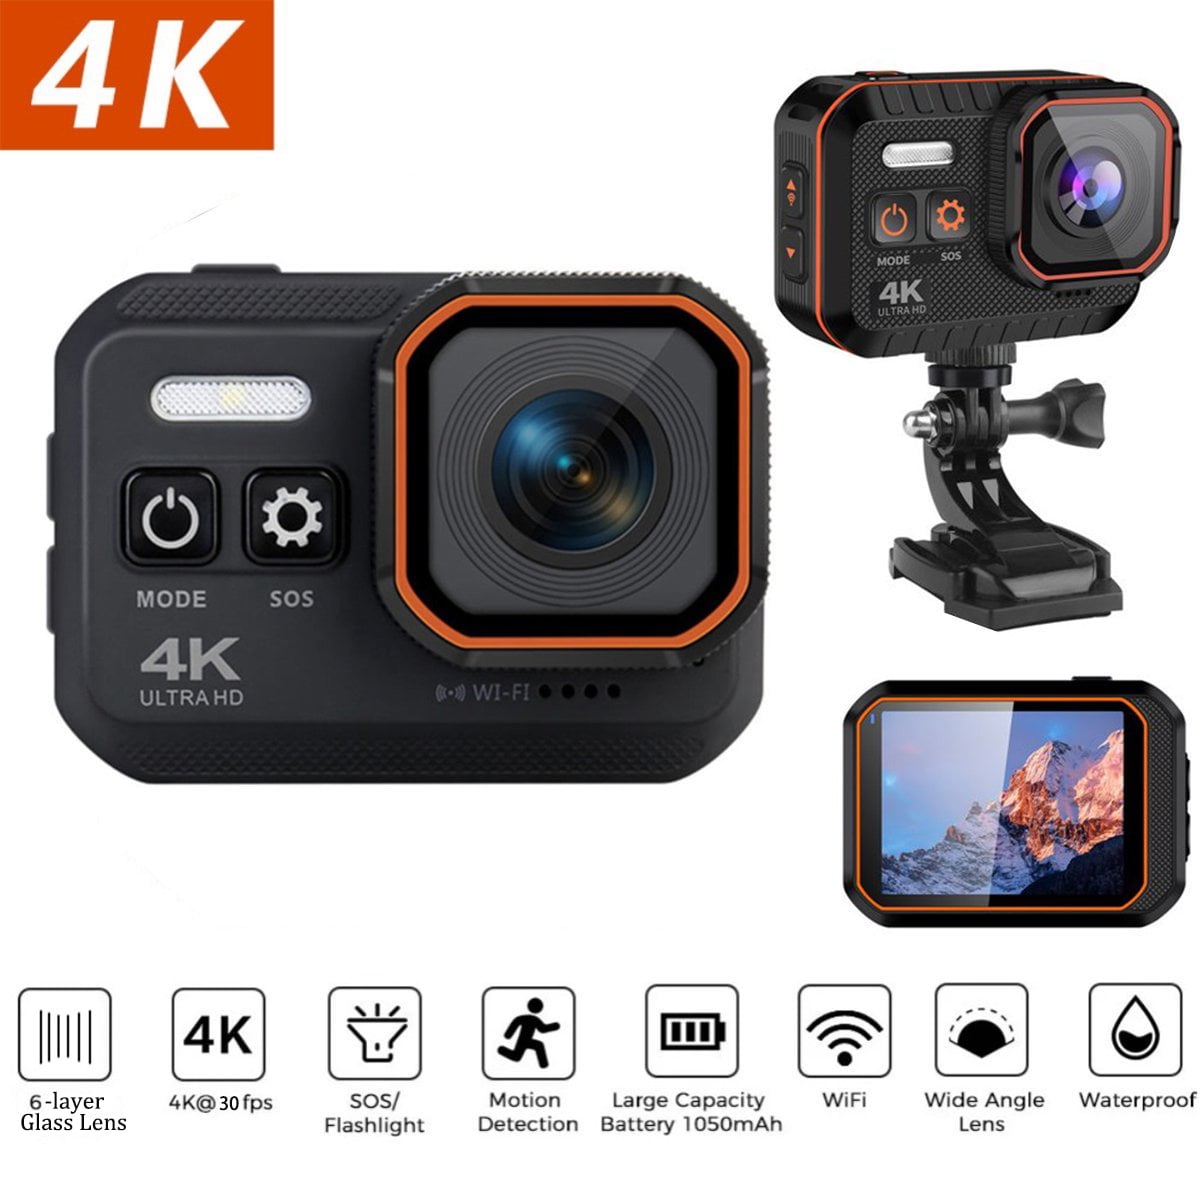 Action Camera 4K Waterproof Camera Underwater Camera WiFi Ultra HD 16mp 170 Degrees Wide Angle Sports Camera with Remote Control 2 Batteries and Mounting Accessories Kit 